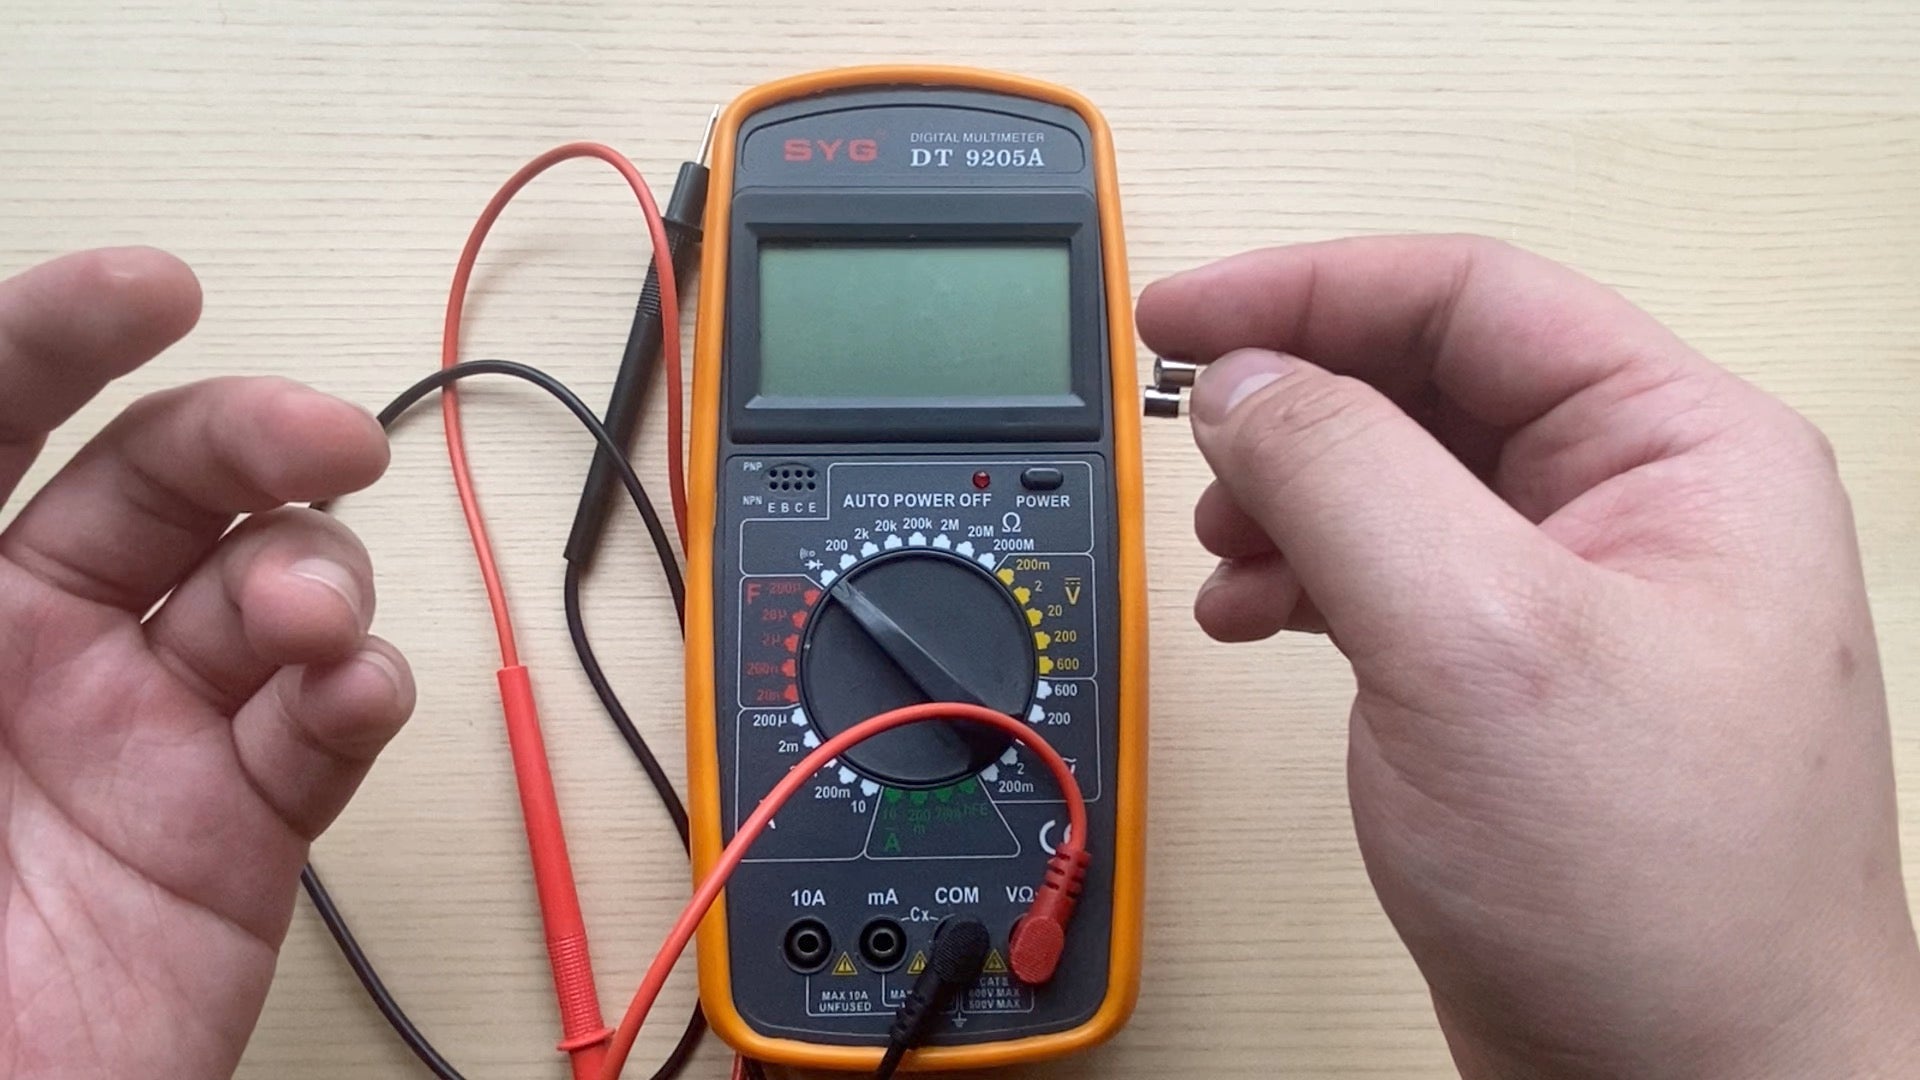 How to identify and replace fuses in your digital multimeter